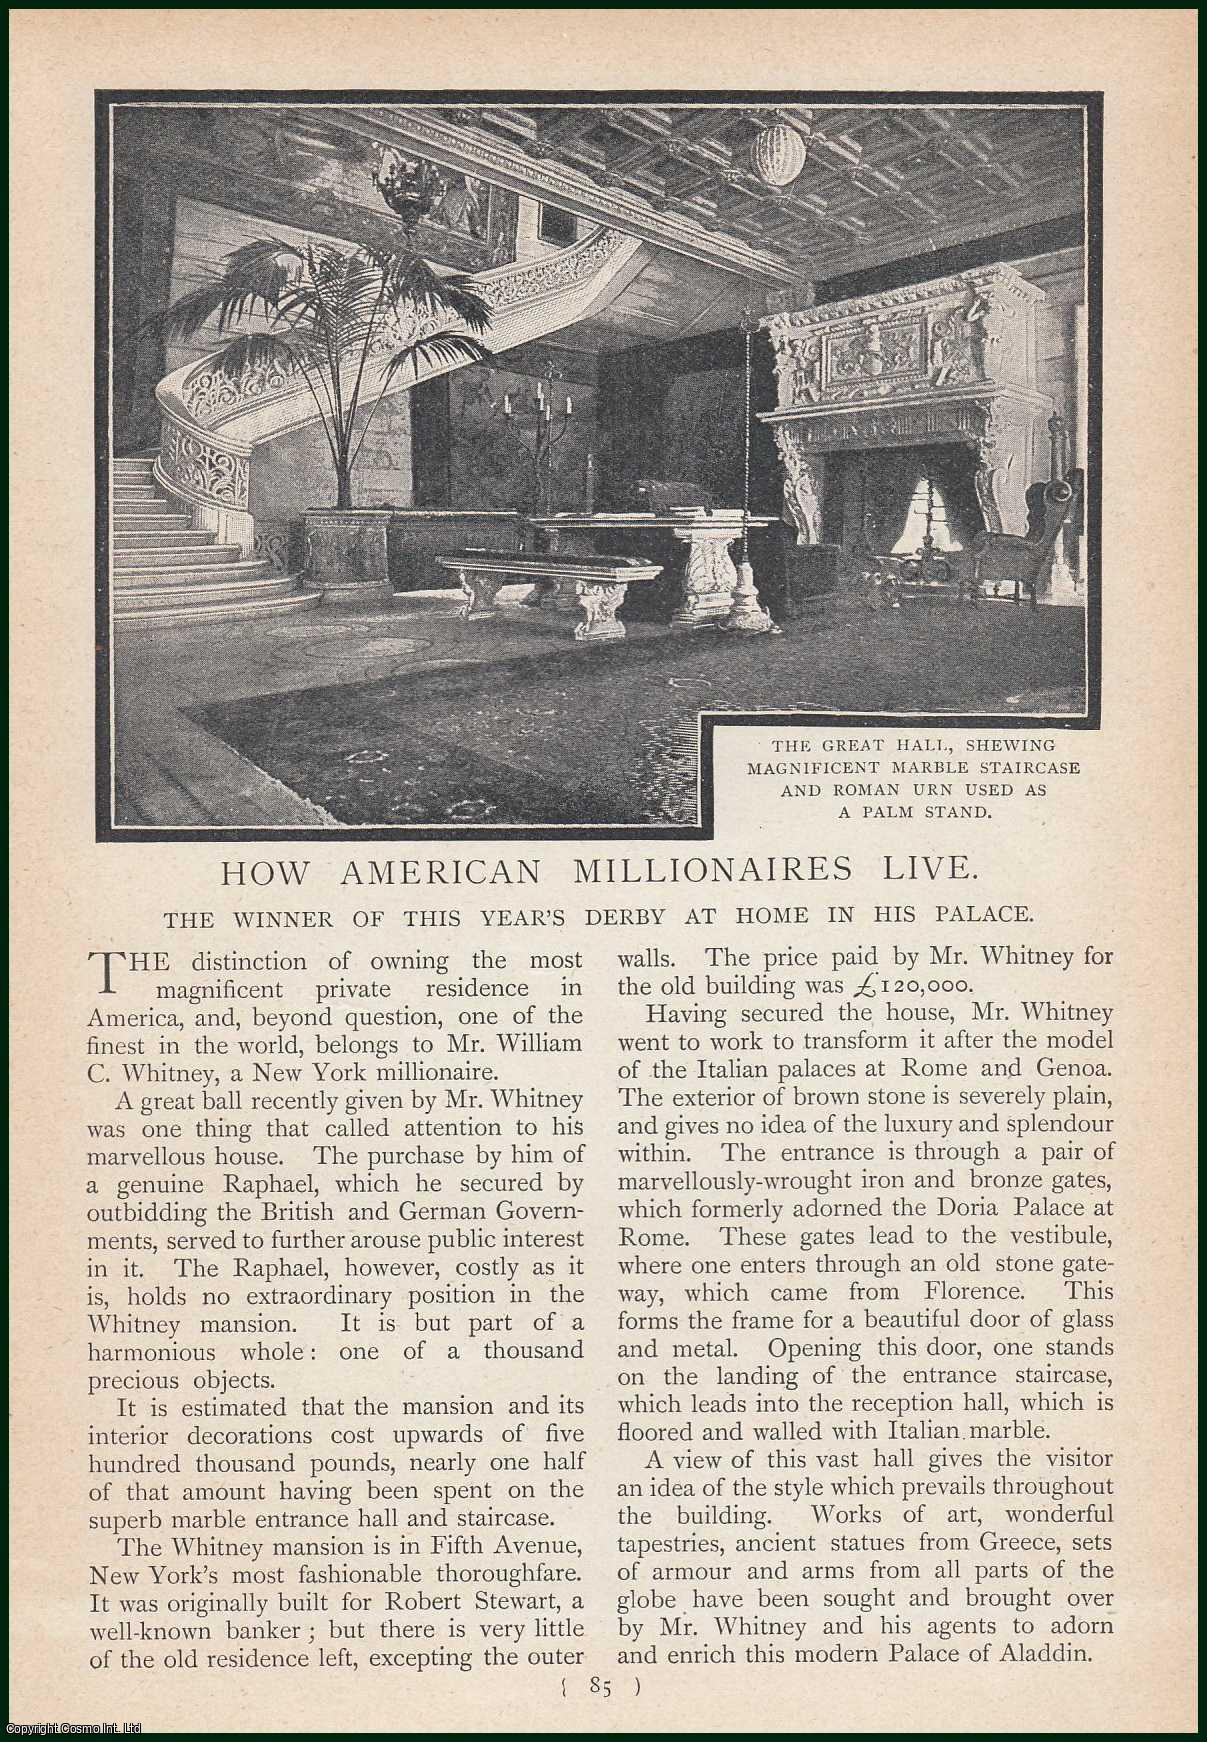 Unstated - Mr. William C. Whitney, The Winner of this year's Derby at Home in his Palace : How American Millionaires Live. An uncommon original article from the Harmsworth London Magazine, 1902.